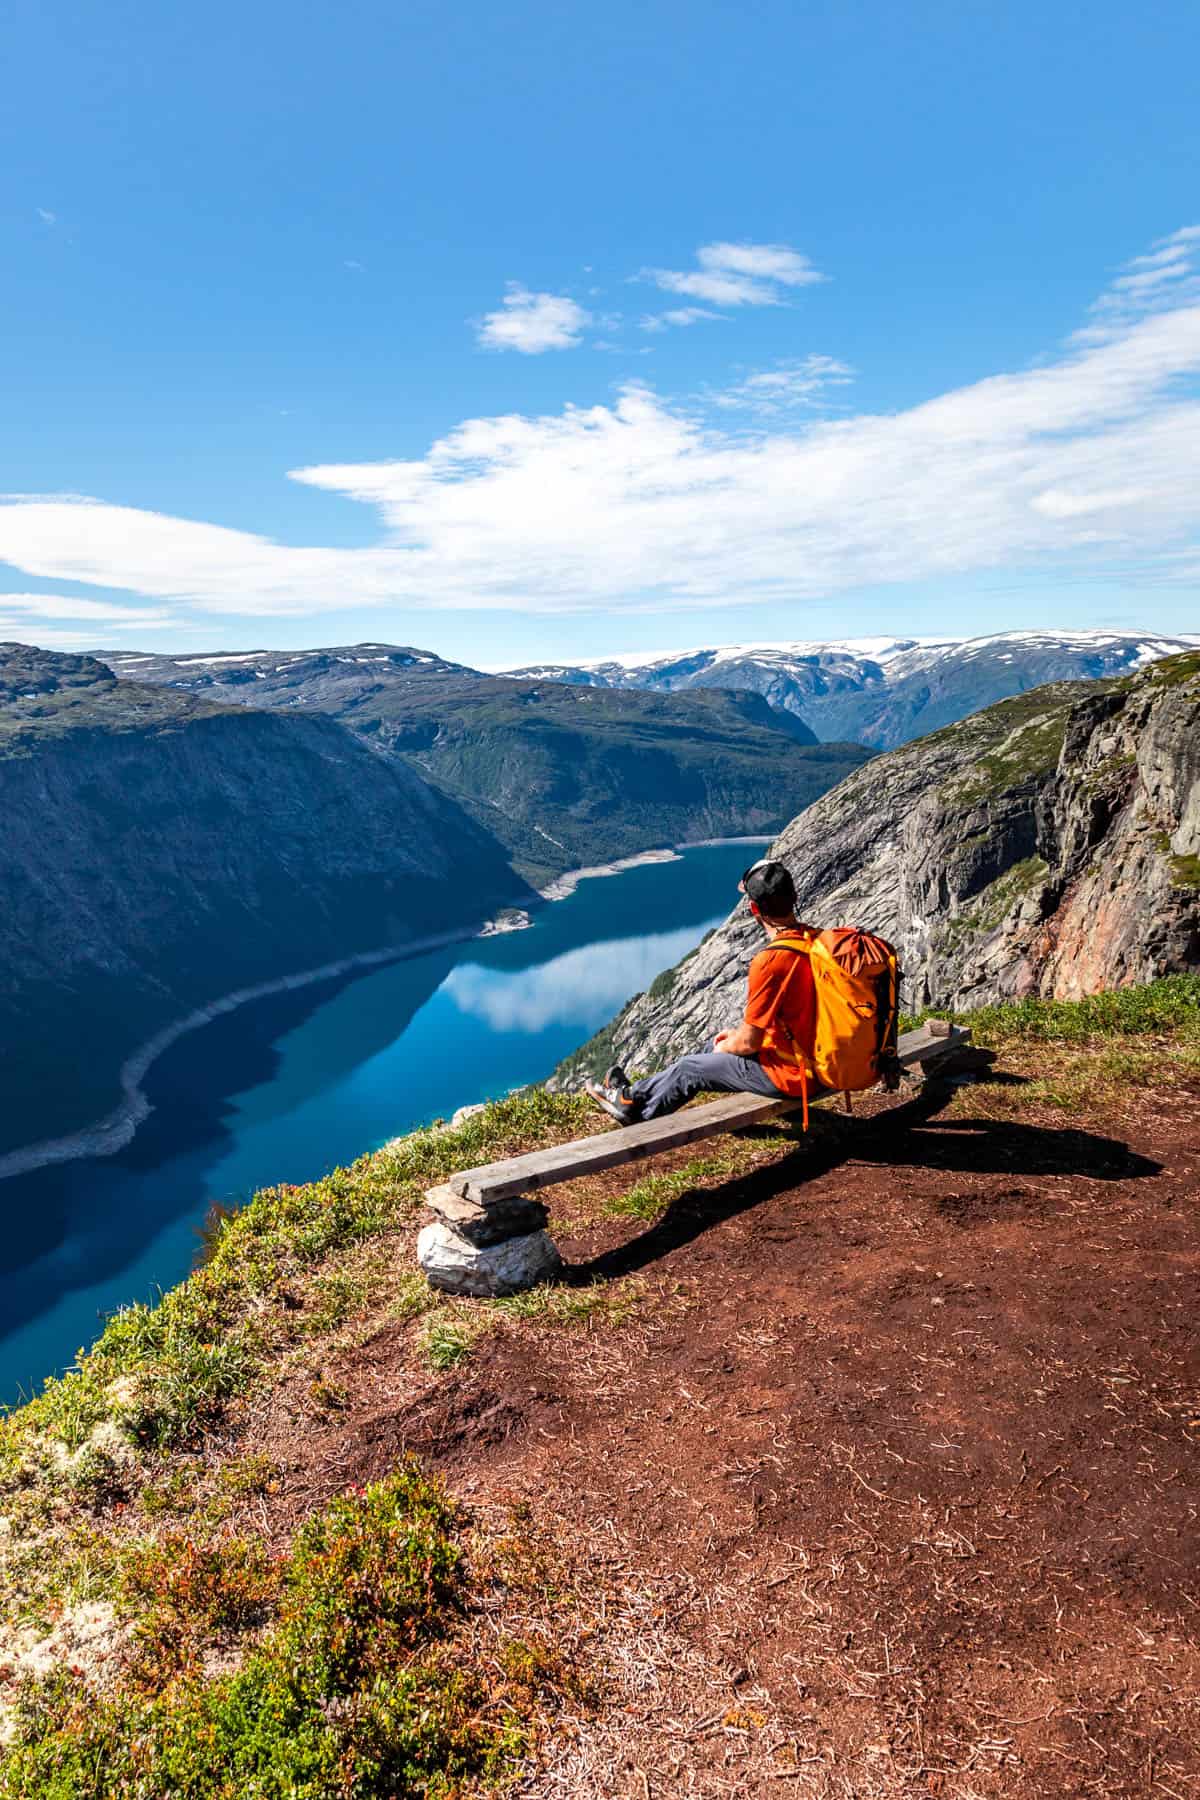 Man with an orange backpack sitting on a low wooden bench overlooking a fjord with sunny blue skies.